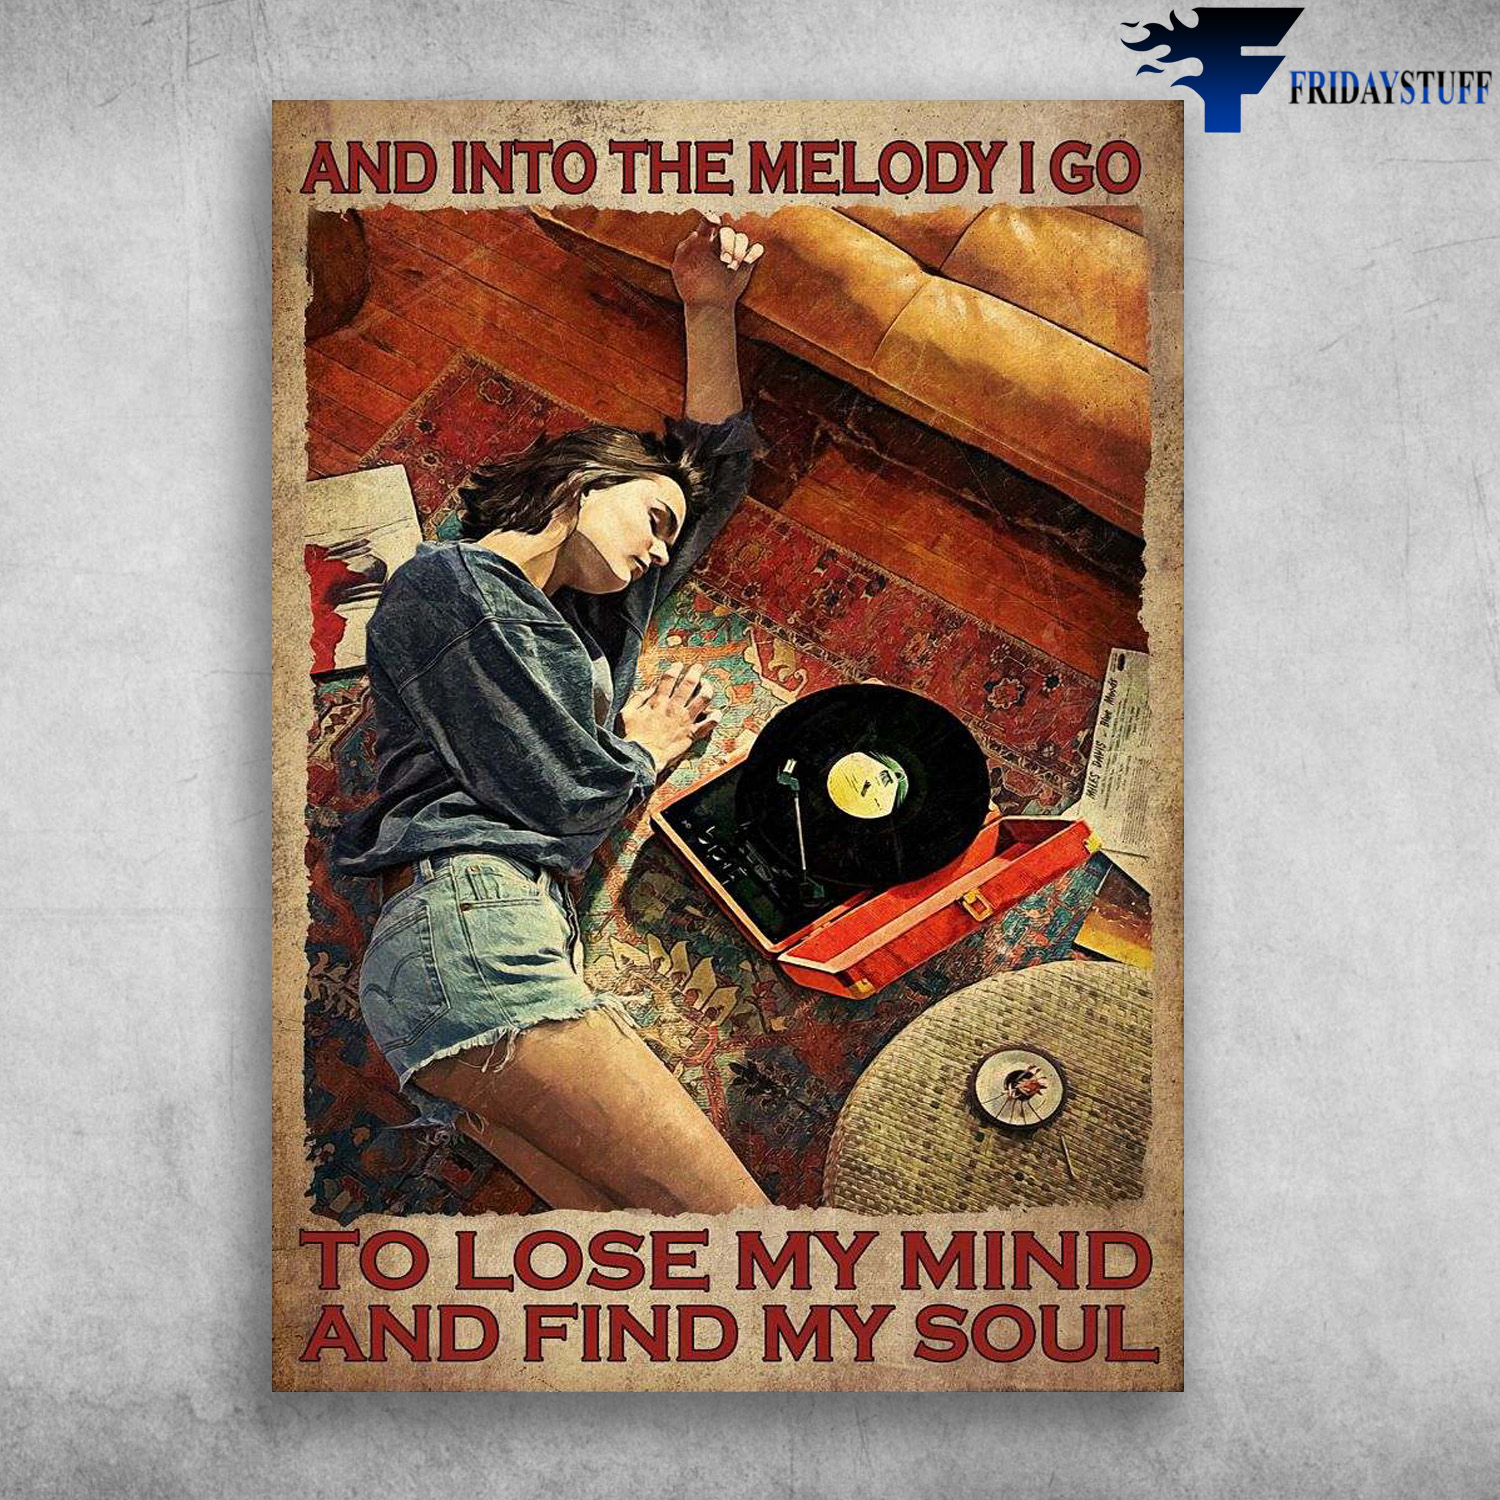 Vinyl Record Girl - And Into The Melody, I Go To Lose My Mind And Find My Soul